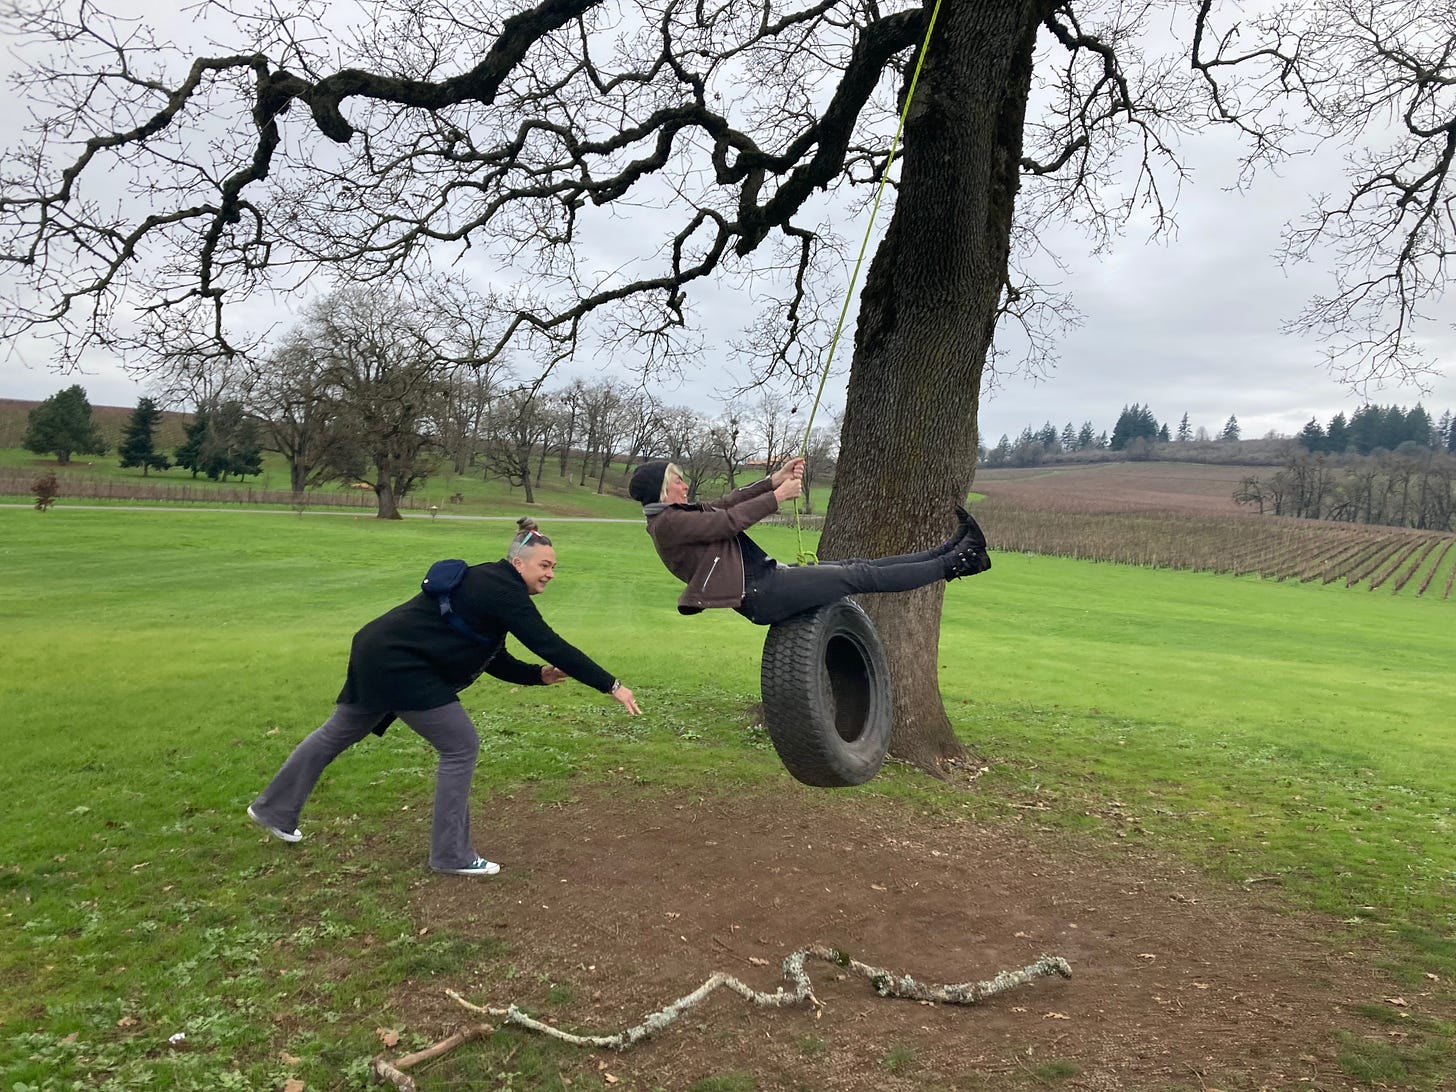 Jessie on a tire swing beneath a tree in winter while her friend pushes her.